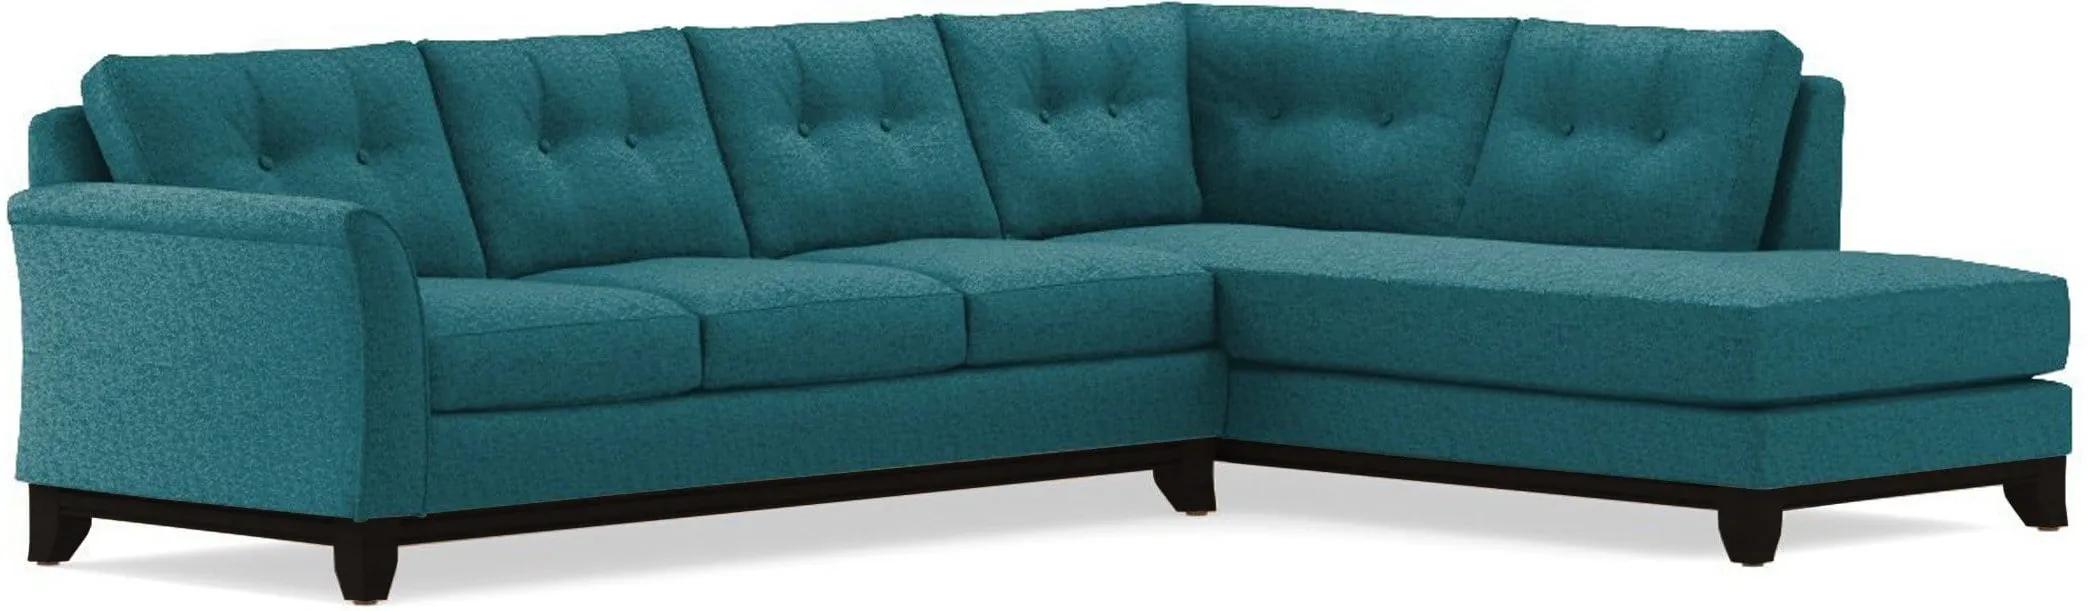 Marco 2pc Sectional Sofa